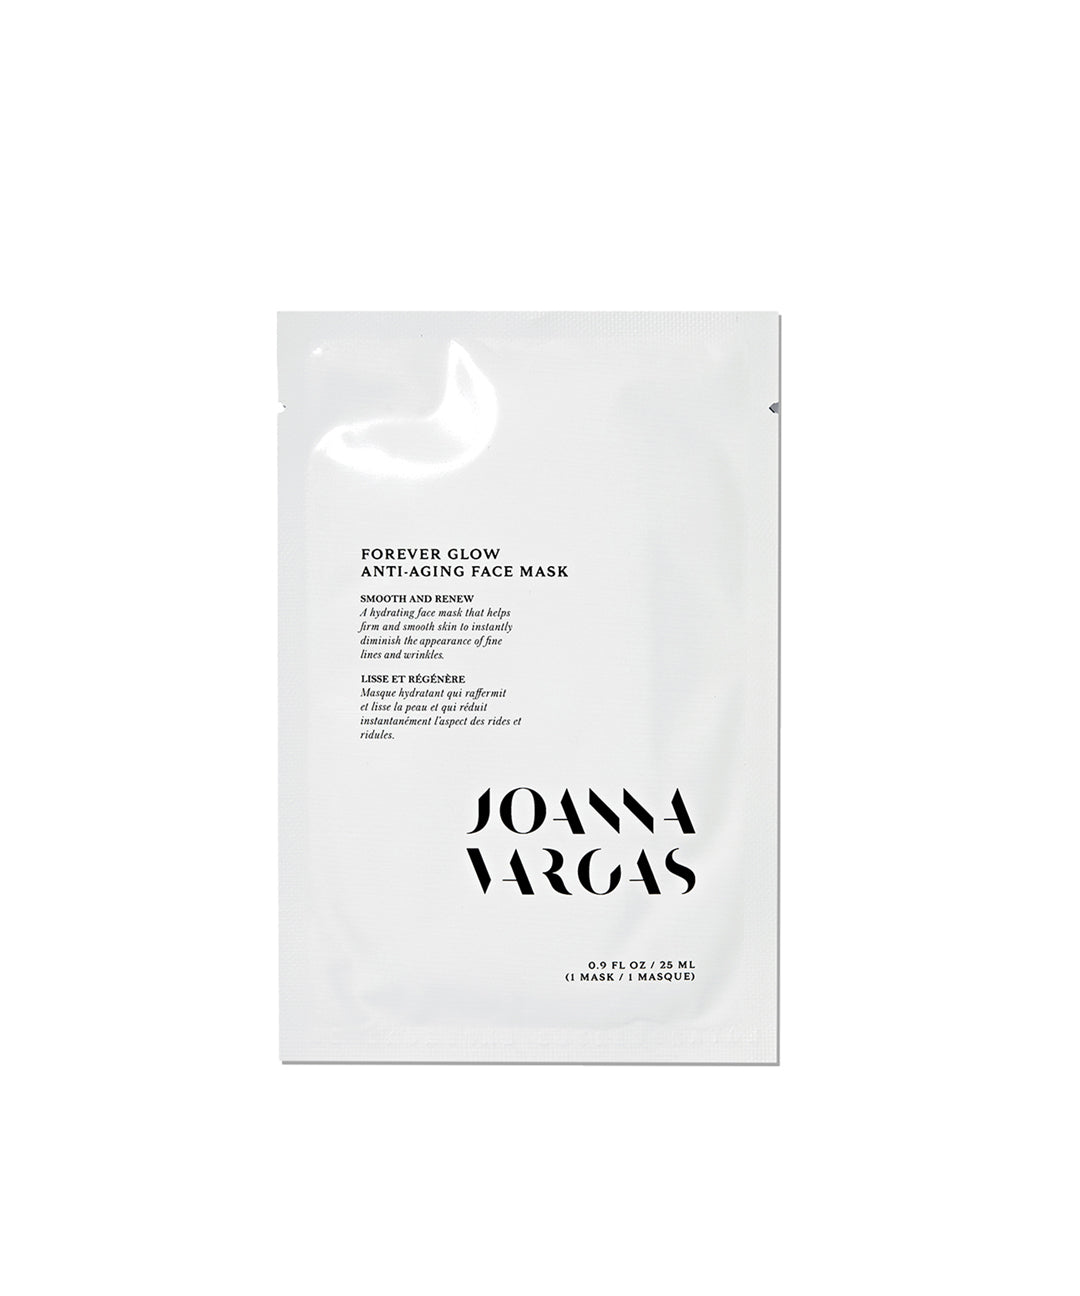 FOREVER GLOW ANTI-AGING FACE MASK SINGLE